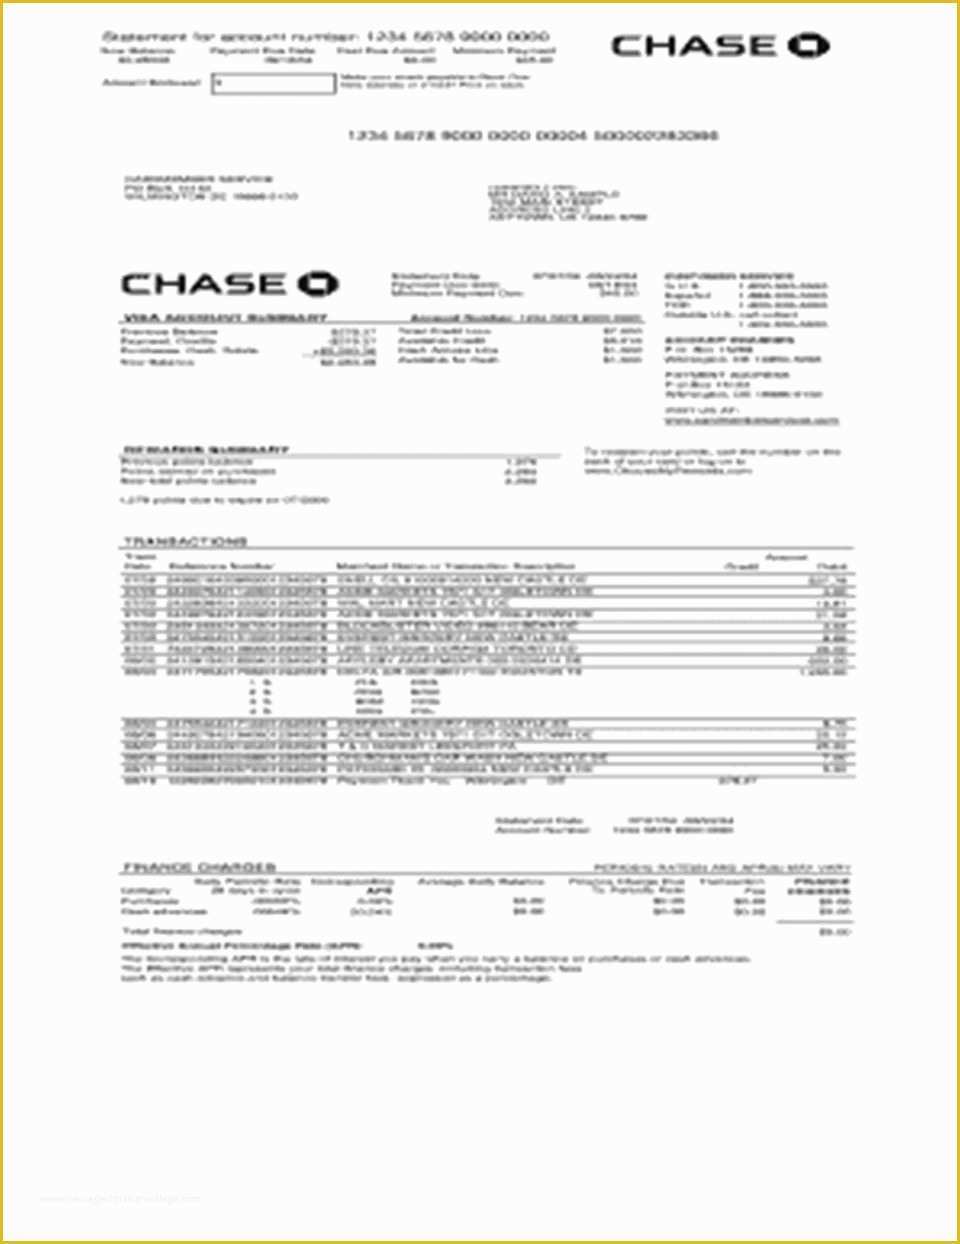 Free Bank Statement Template Of Chase Bank Statement Template